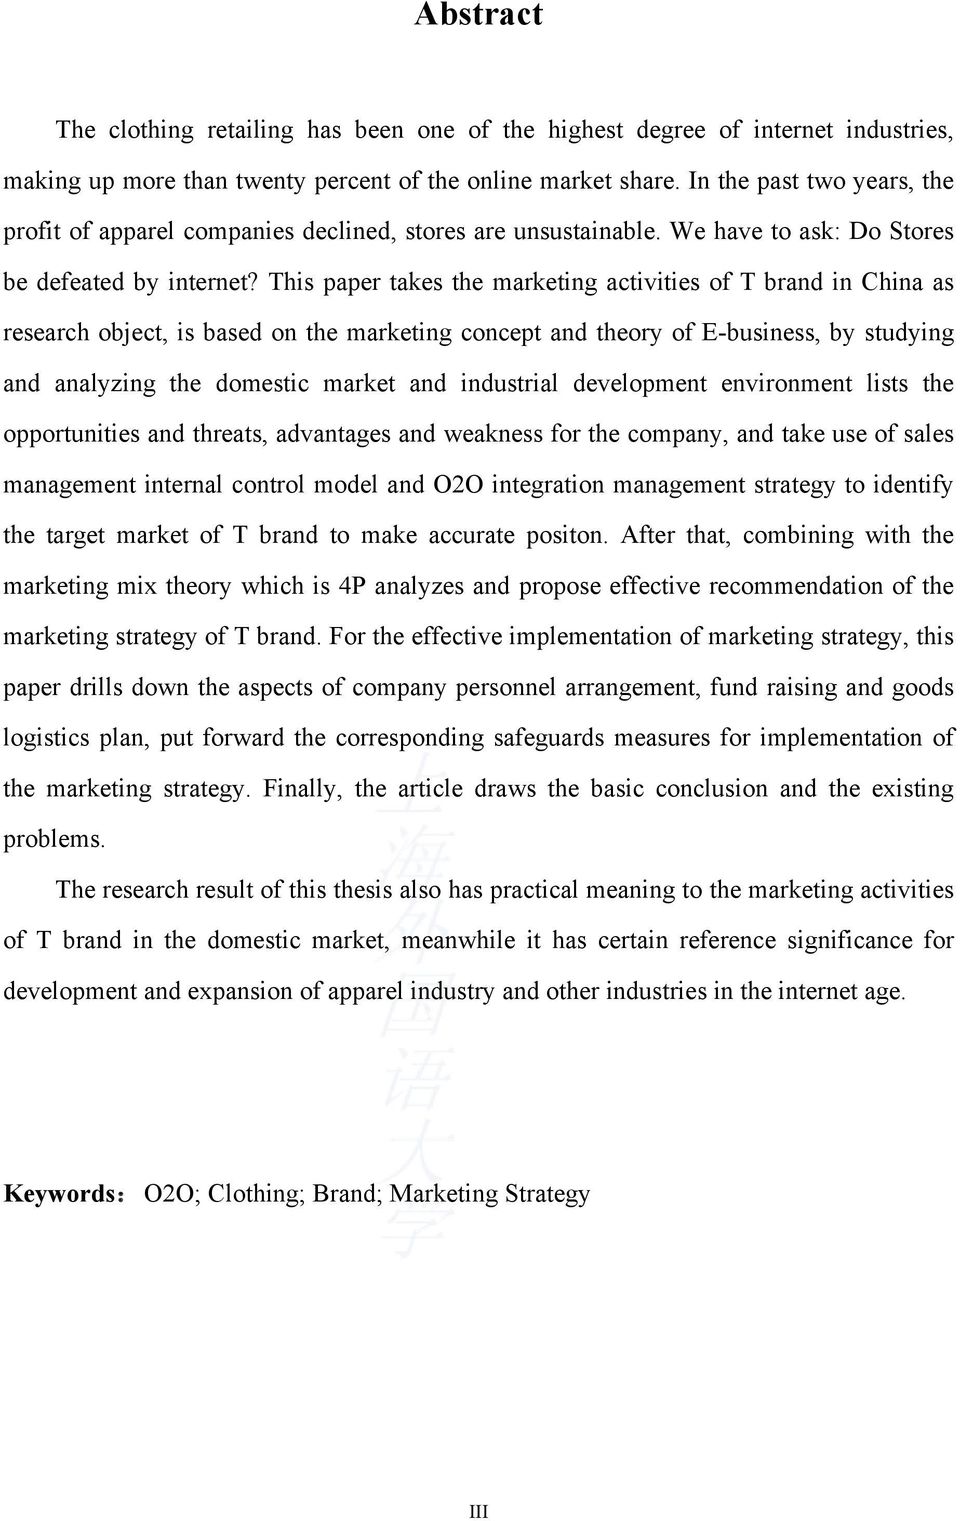 This paper takes the marketing activities of T brand in China as research object, is based on the marketing concept and theory of E-business, by studying and analyzing the domestic market and